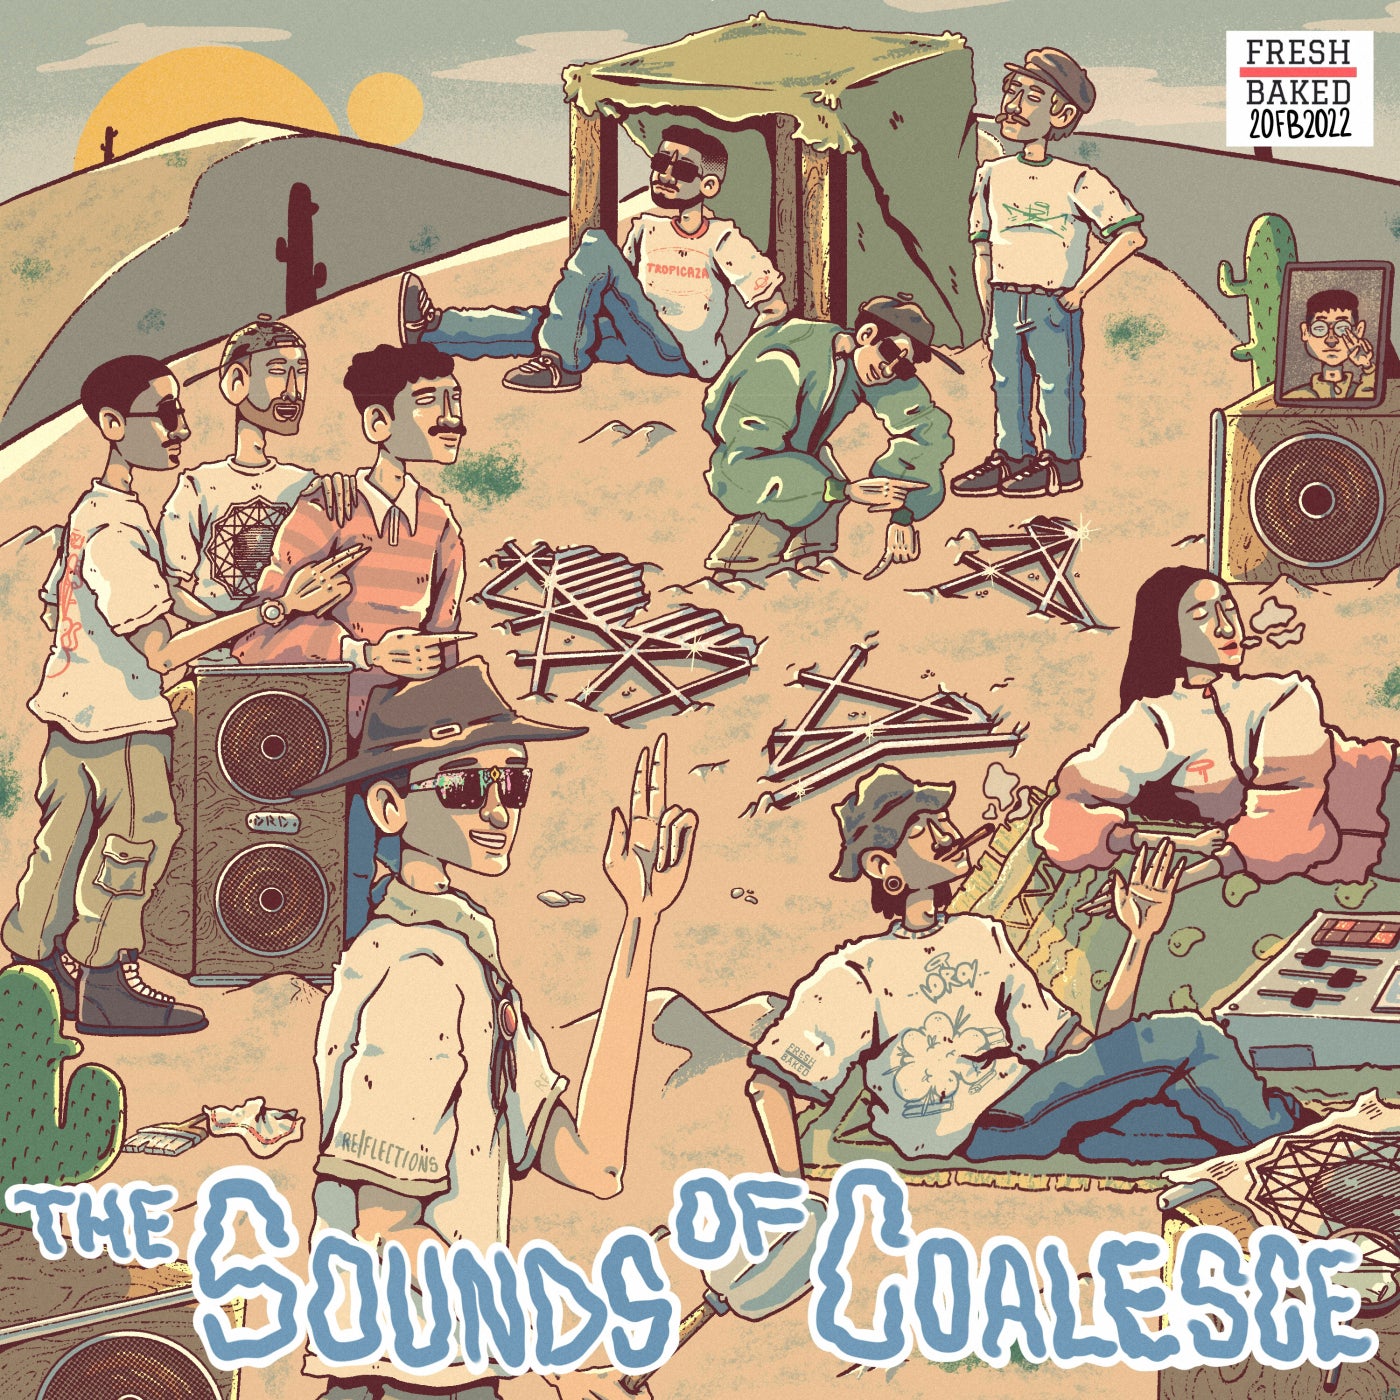 The Sounds of Coalesce